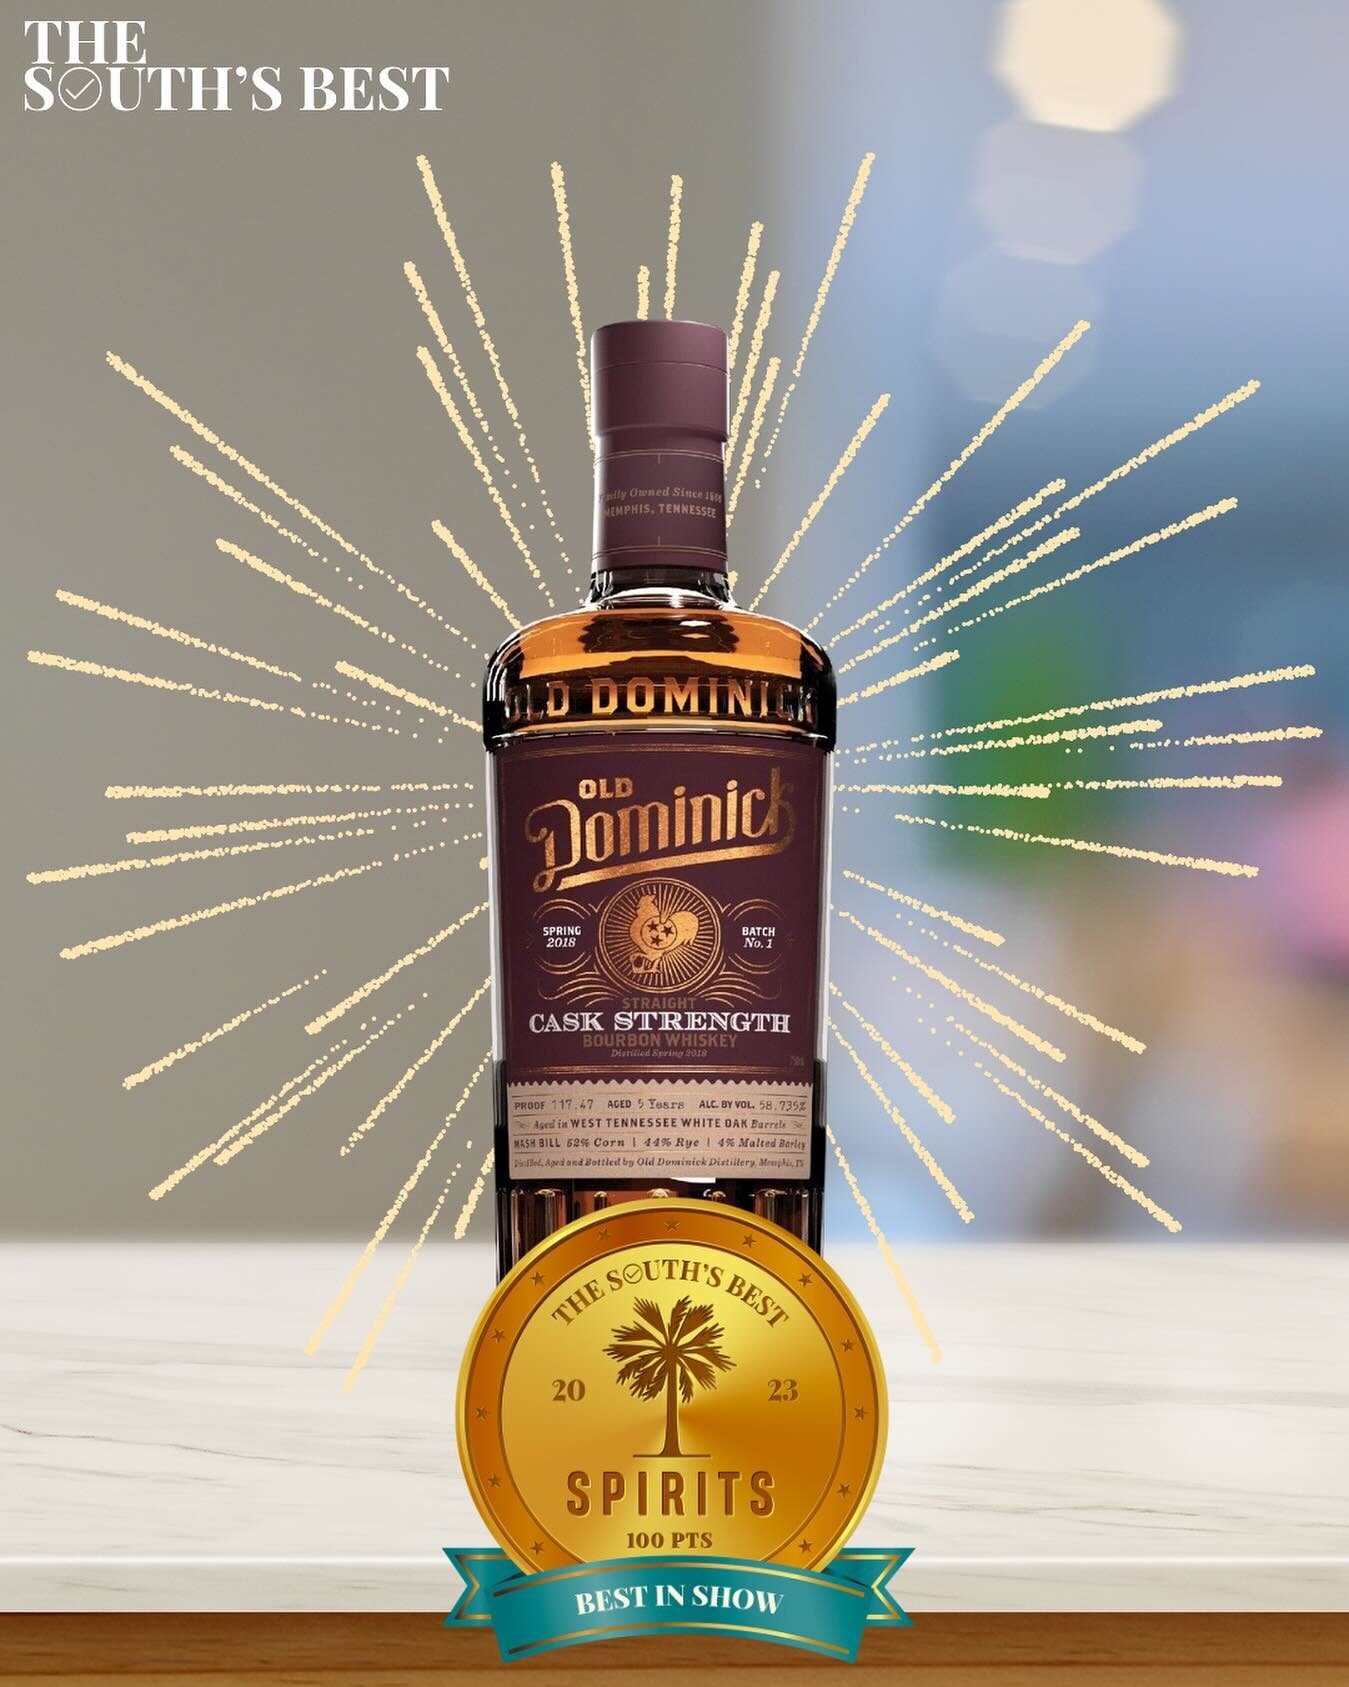 The official results from the inaugural The South&rsquo;s Best Spirits Awards have just been released! 🏆

The overall winner receiving Best in Show is @olddominick's Straight Bourbon out of Tennessee with a perfect score. 🥇

Follow link in profile 